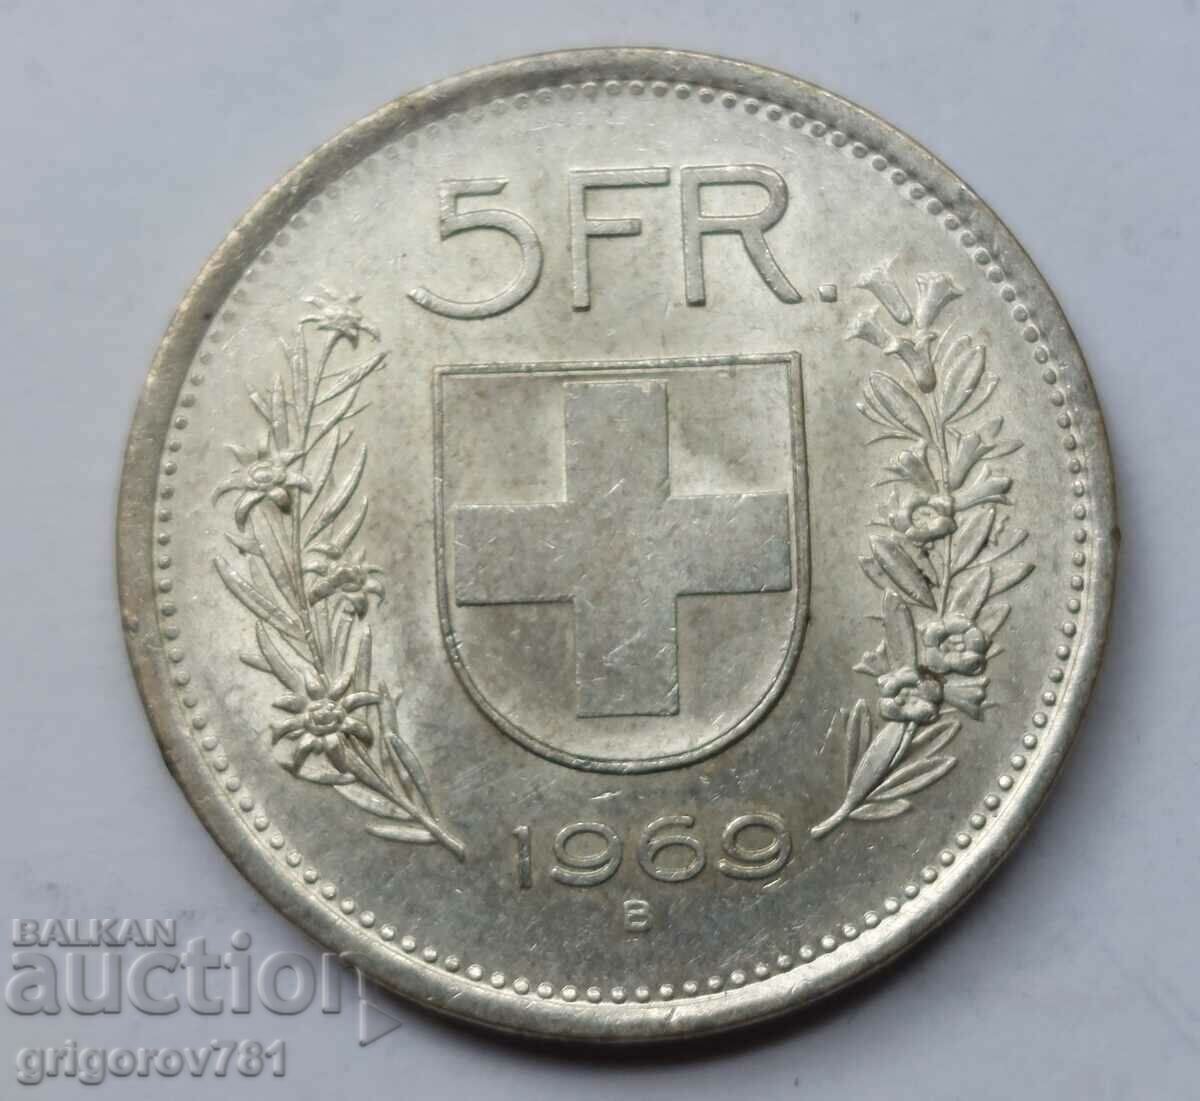 5 Francs Silver Switzerland 1969 B - Silver Coin #19